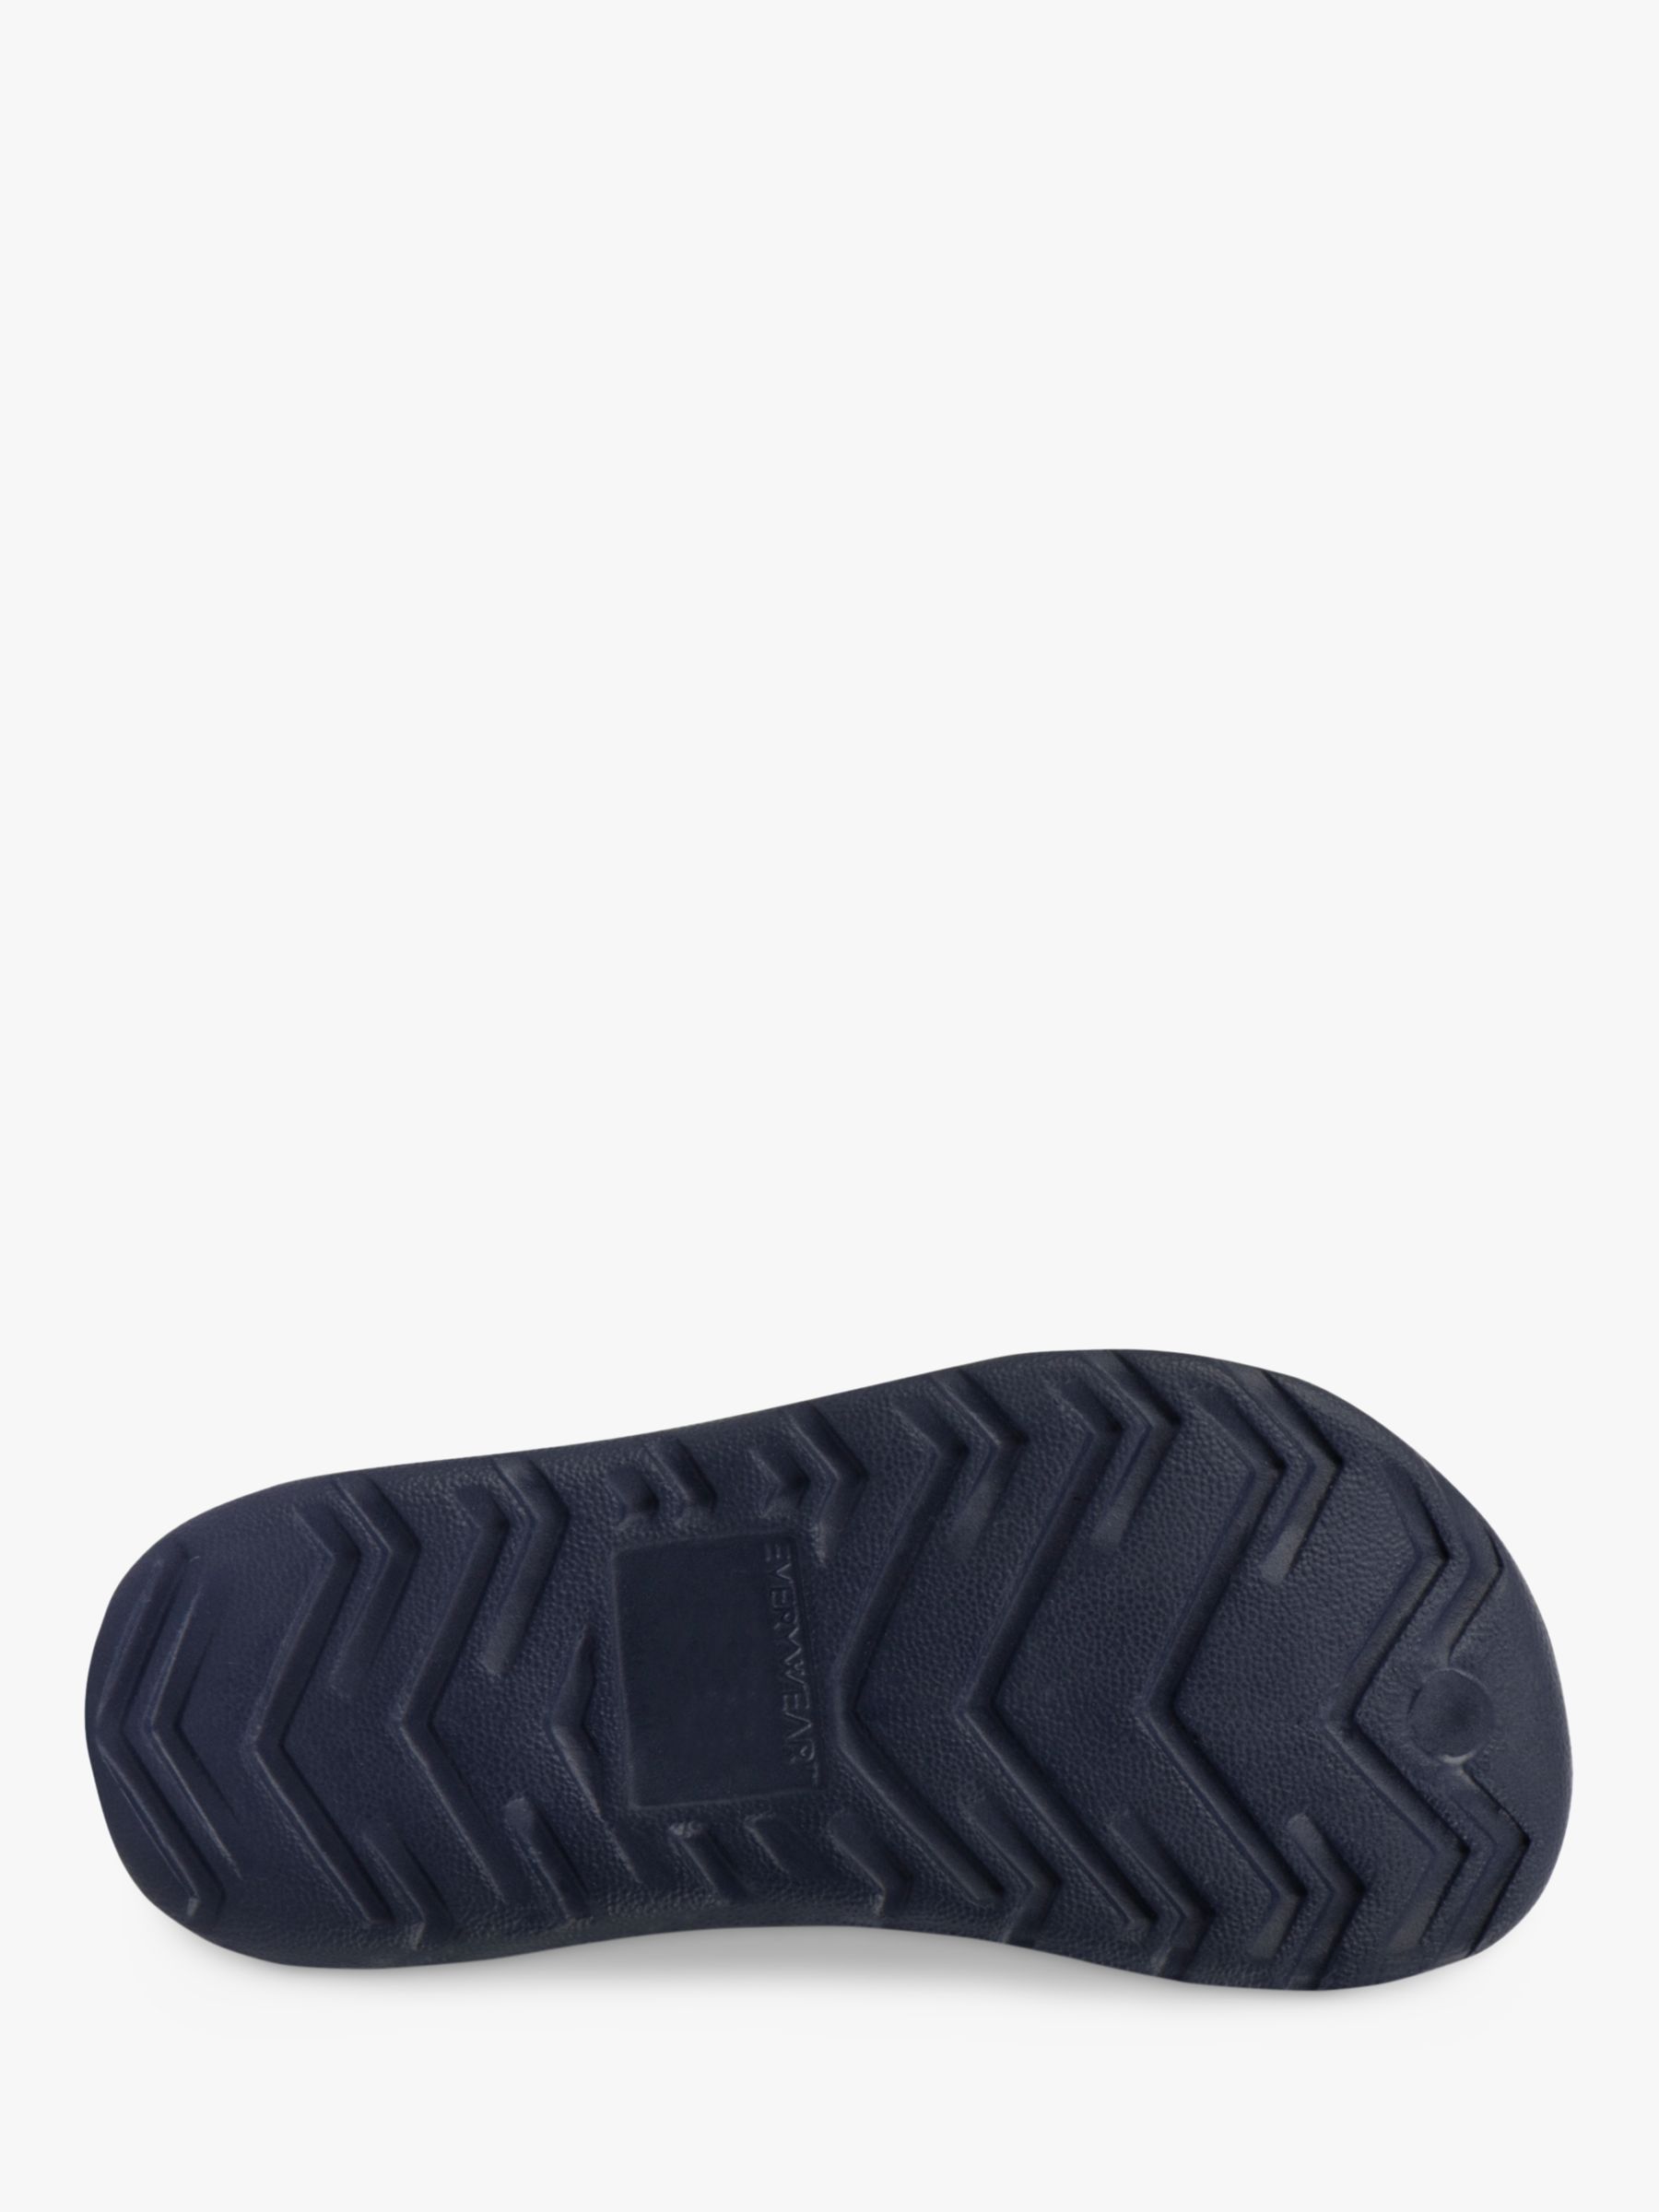 totes Kids' Solbounce Clogs, Navy, 2-3